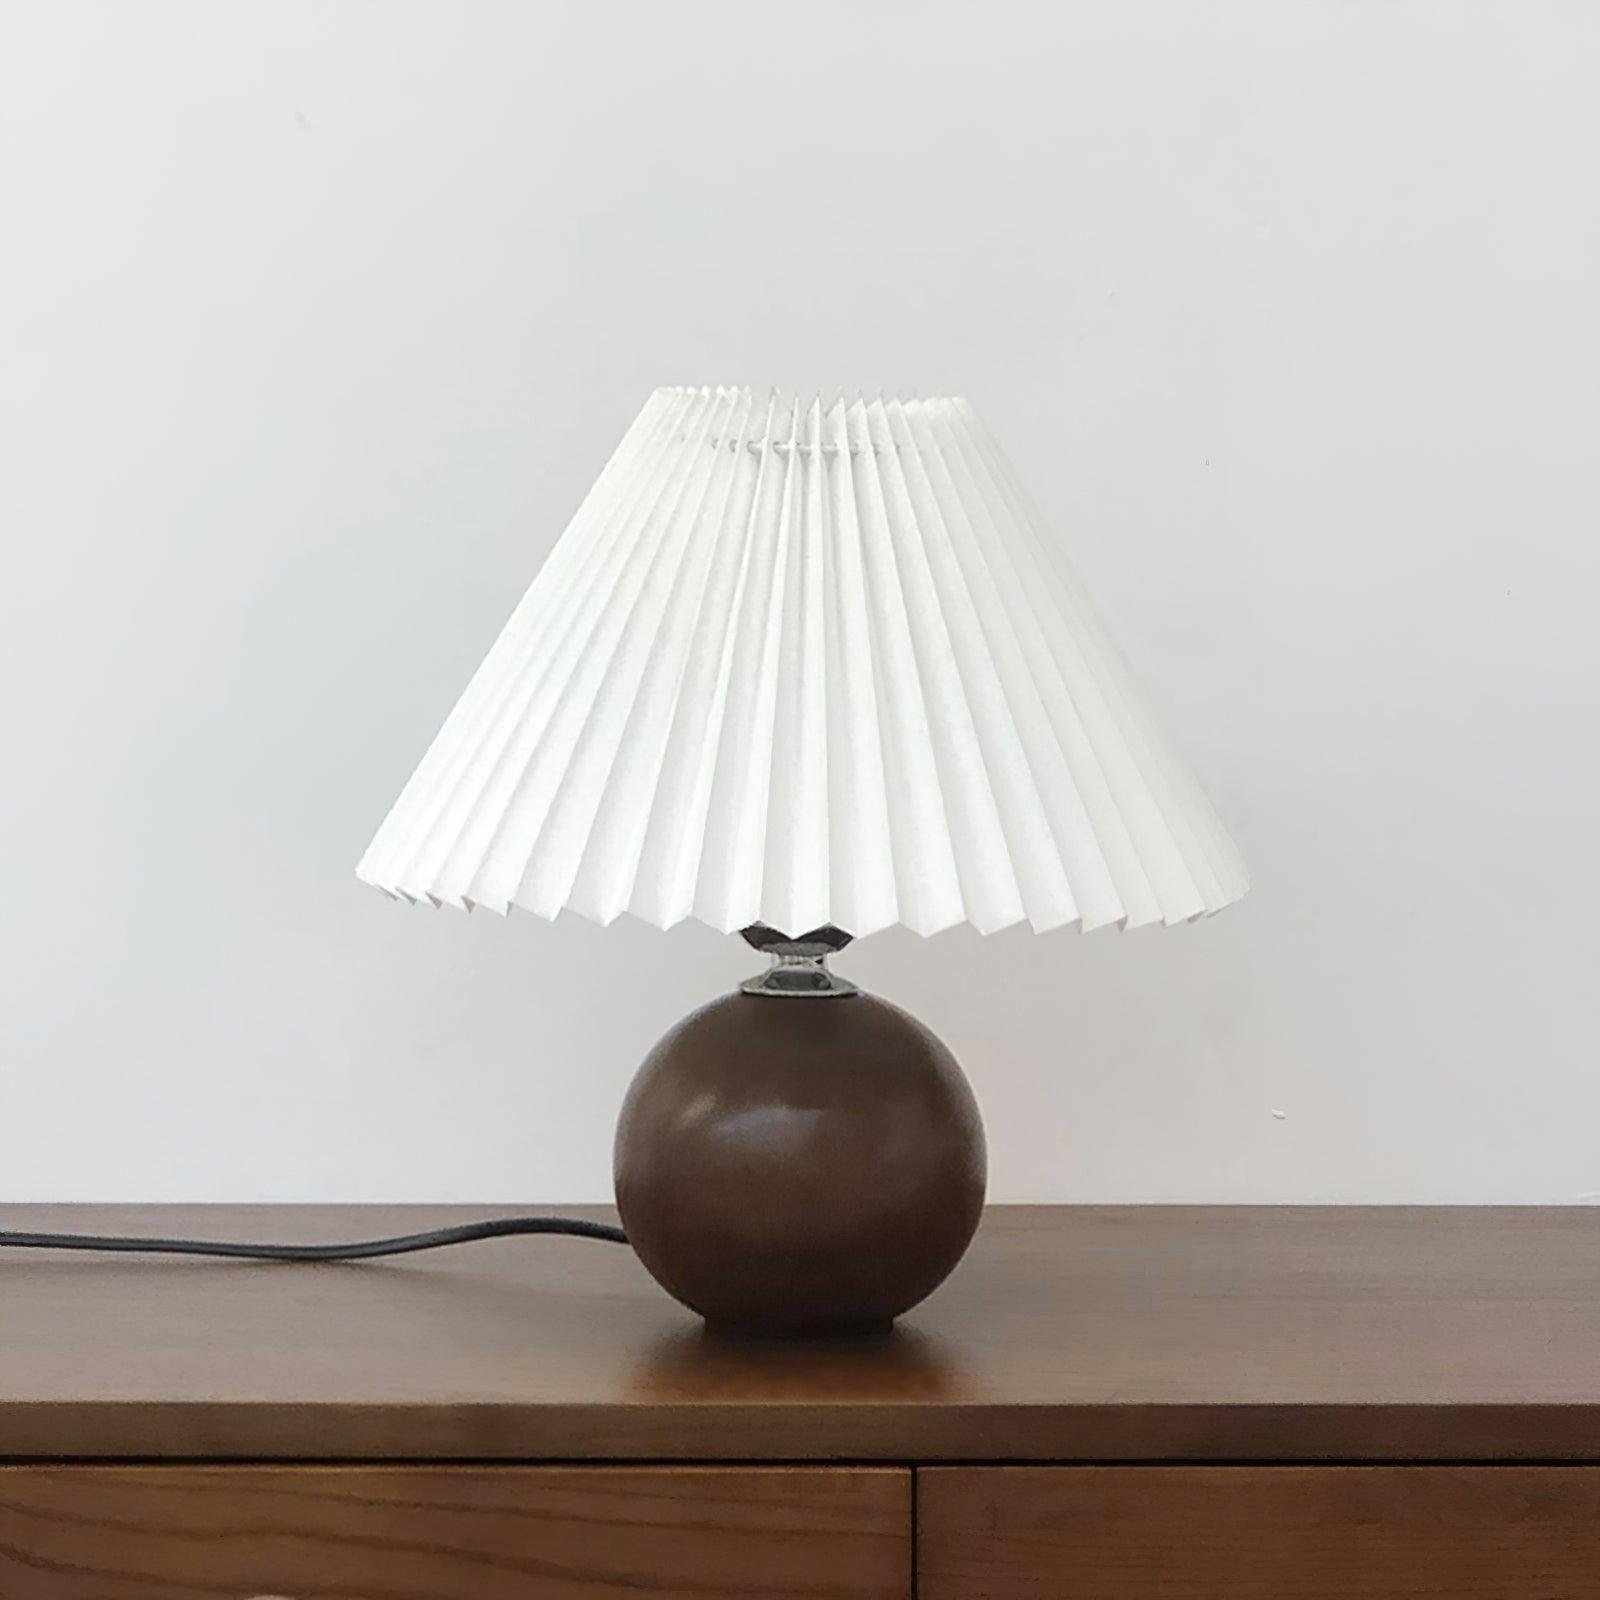 Walnut and White Wooden Pleated Table Lamp with UK Plug, Diameter 28cm x Height 30cm